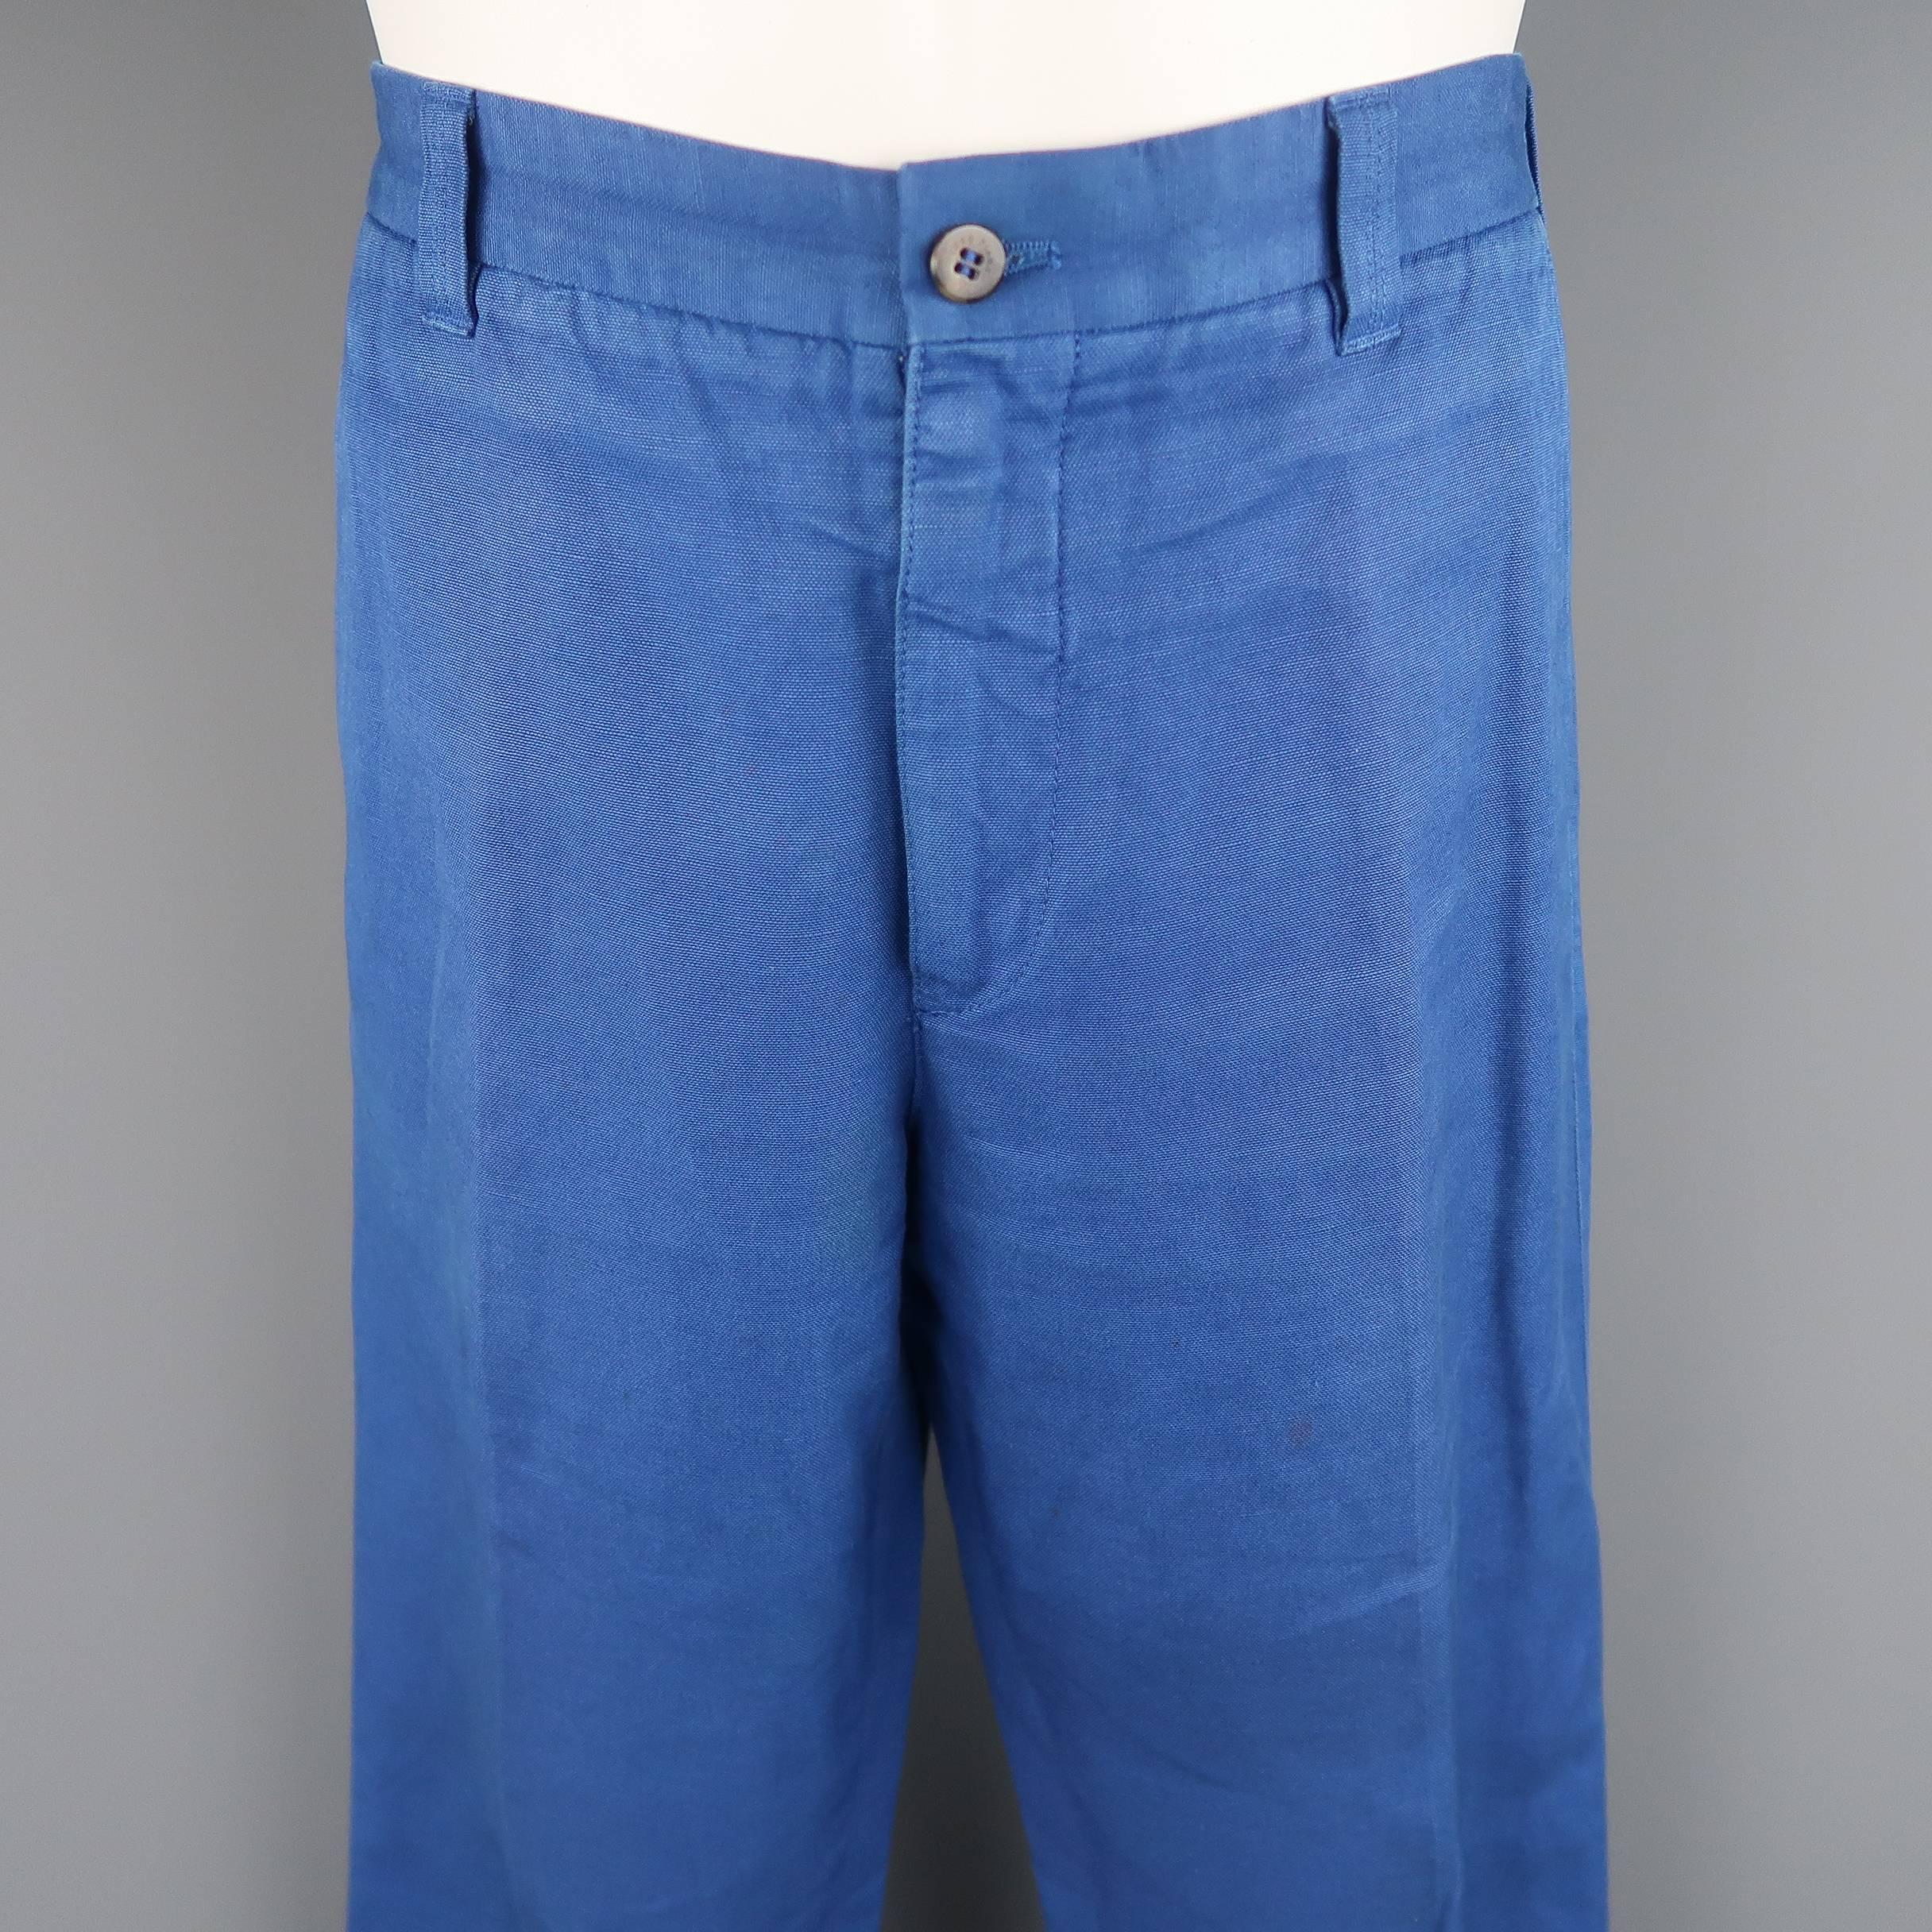 LORO PIANA chinos come in royal blue cotton canvas with a classic fit leg. Fading throughout. As-is. Made in Italy.
 
Fair Pre-Owned Condition.
Marked: IT 50
 
Measurements:
 
Waist: 35 in.
Rise: 10.5 in.
Inseam: 33 in.
